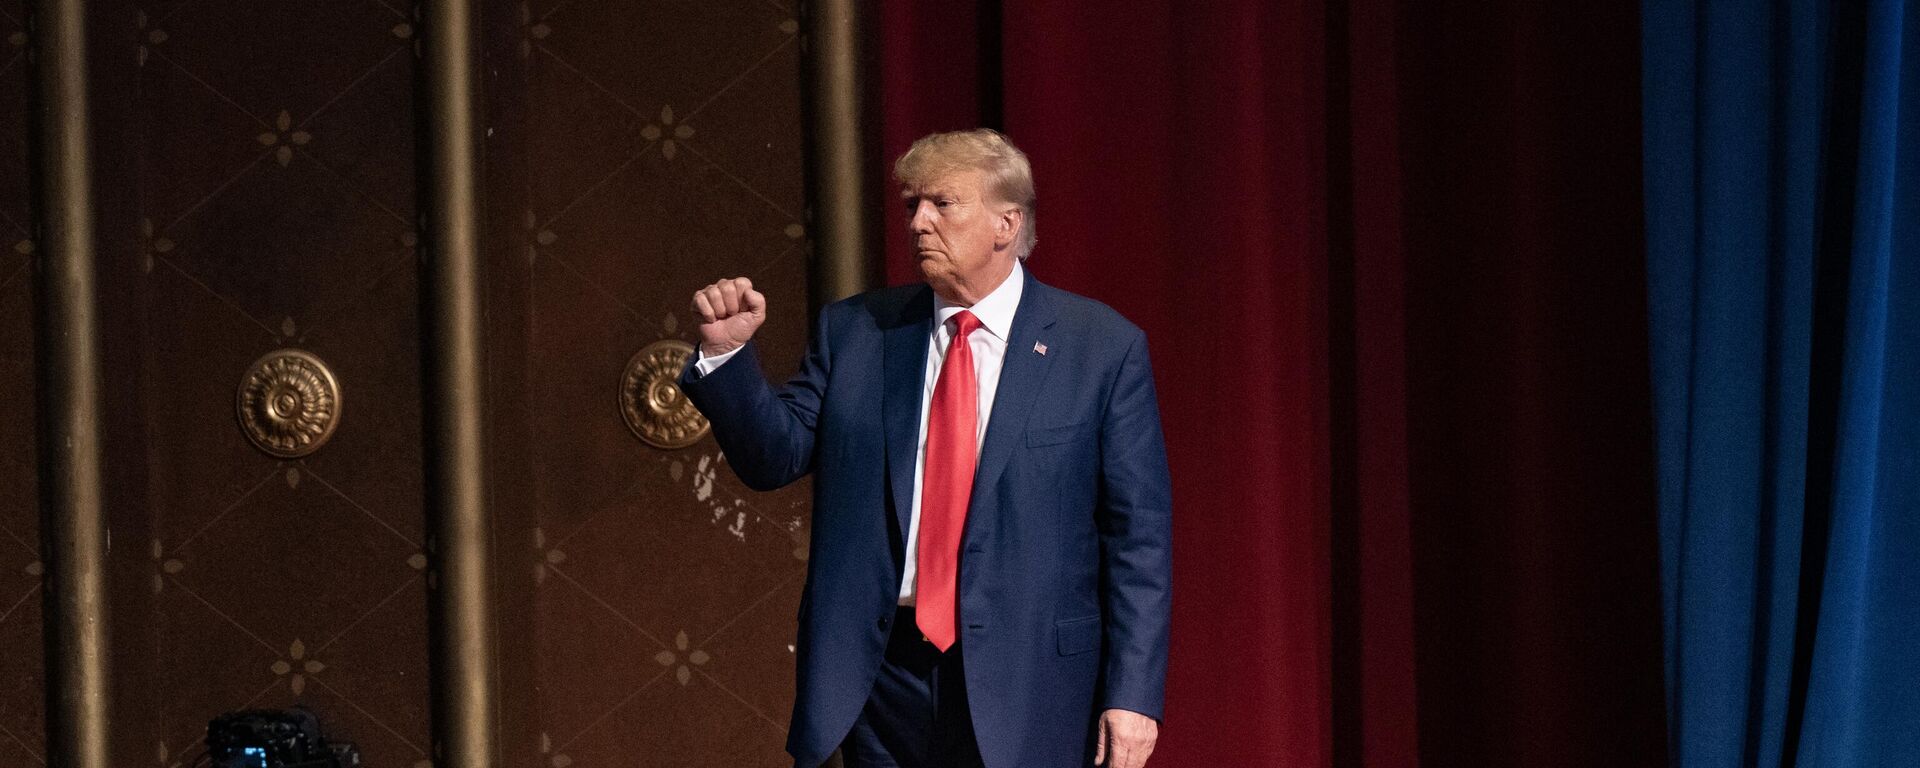 Former US President and 2024 Presidential hopeful Donald Trump gestures as he leaves after speaking at the North Carolina Republican Party Convention in Greensboro, North Carolina, on June 10, 2023 - Sputnik International, 1920, 15.06.2023